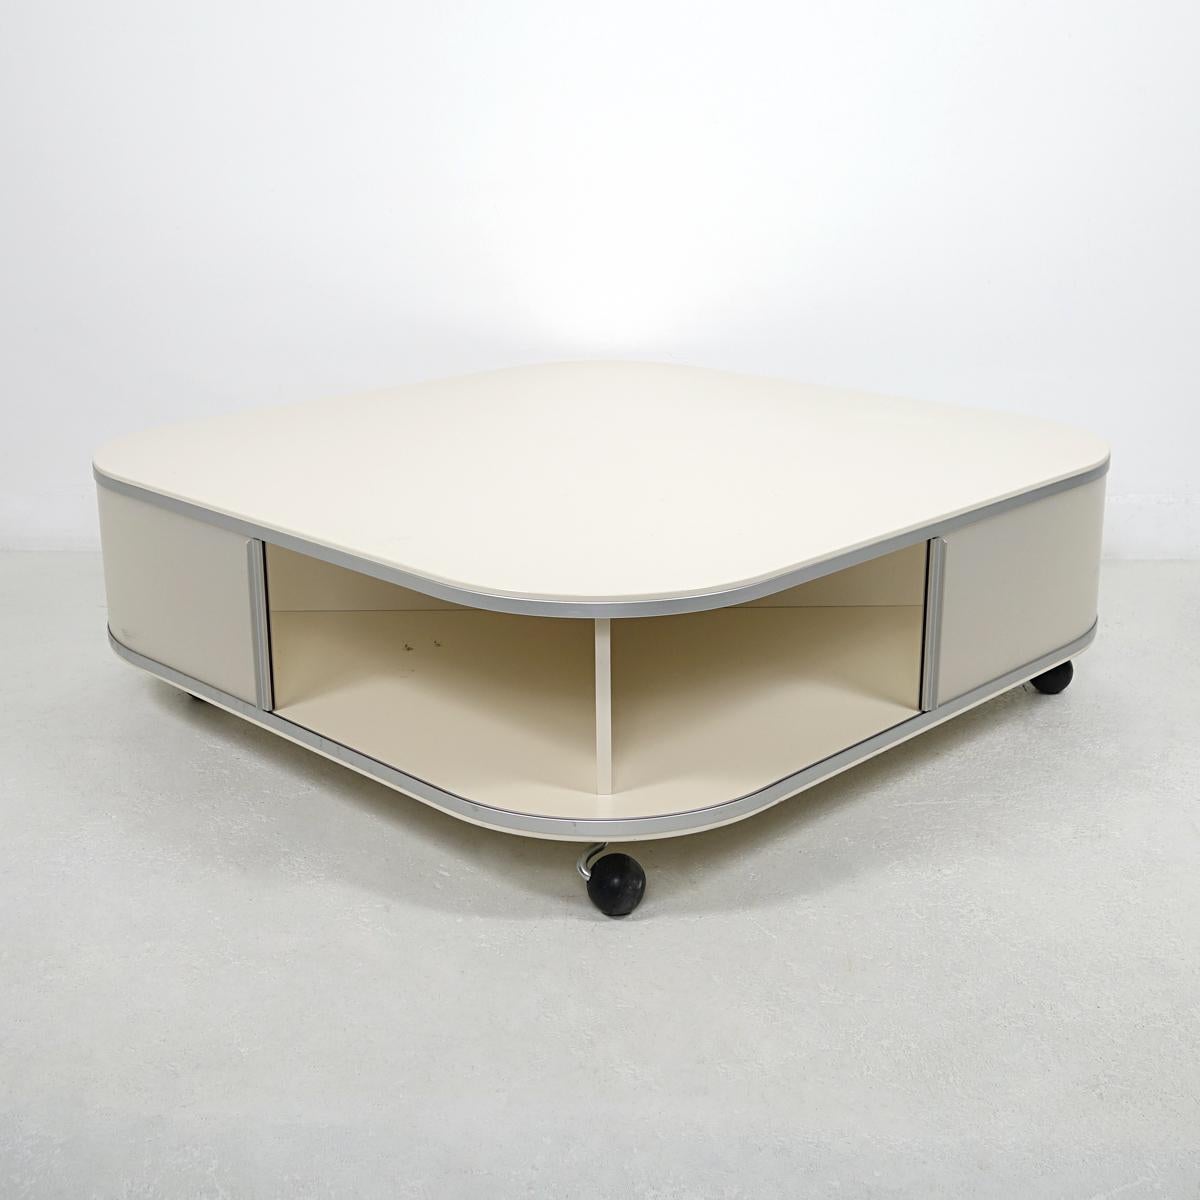 This coffee table manufactured by the famous Dutch label Pastoe probably dates back to the 1980s.
The table made of off-white laminated wood sits on four wheels, making it easy to move. Its square shaped is softened by its round corners. Subtle